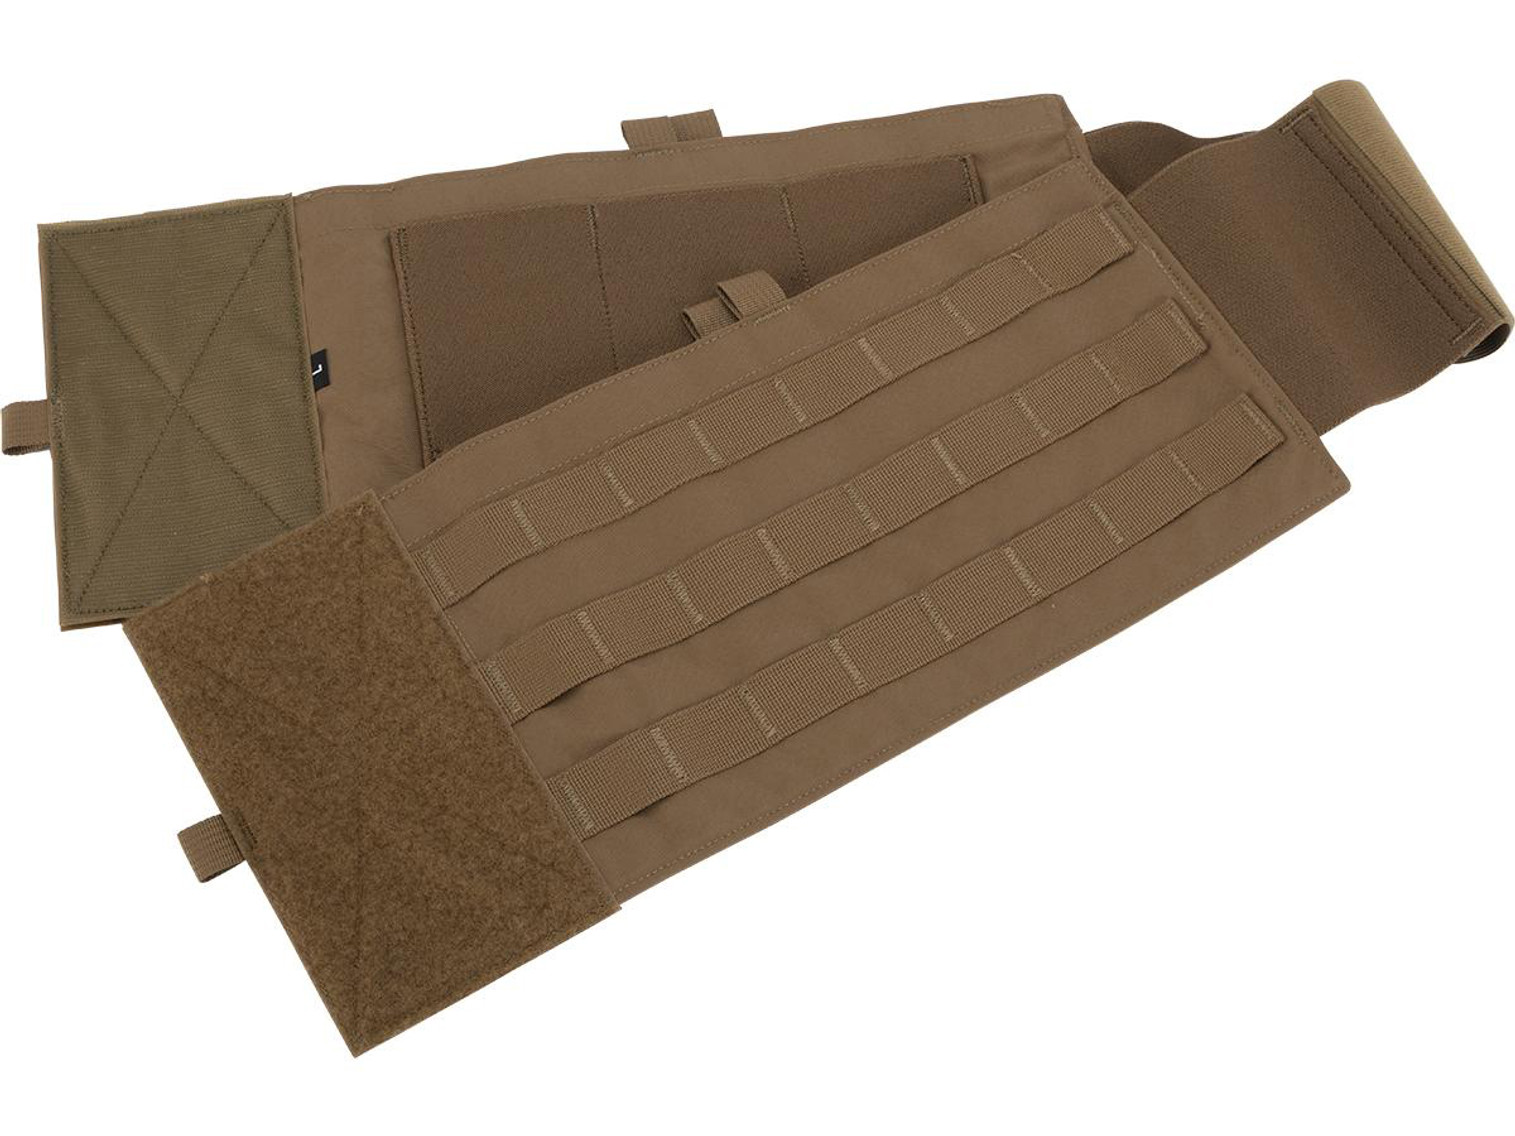 Mayflower Research Standard MOLLE Cummerbund with Side Plate Pocket (Color: Coyote Brown)